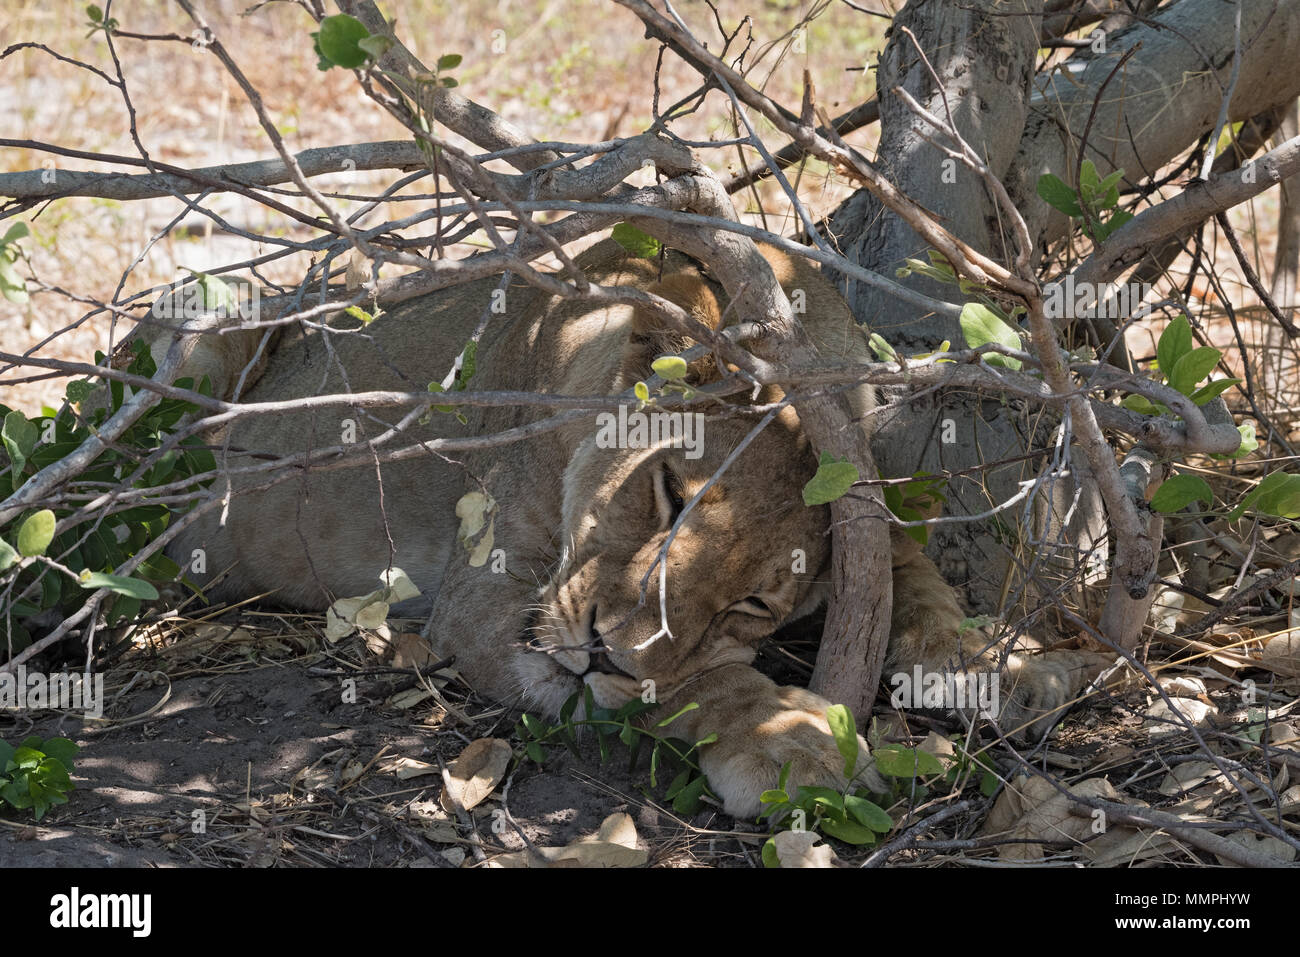 : Sleeping young lion at the roadside in Chobe National Park, Botswana Stock Photo